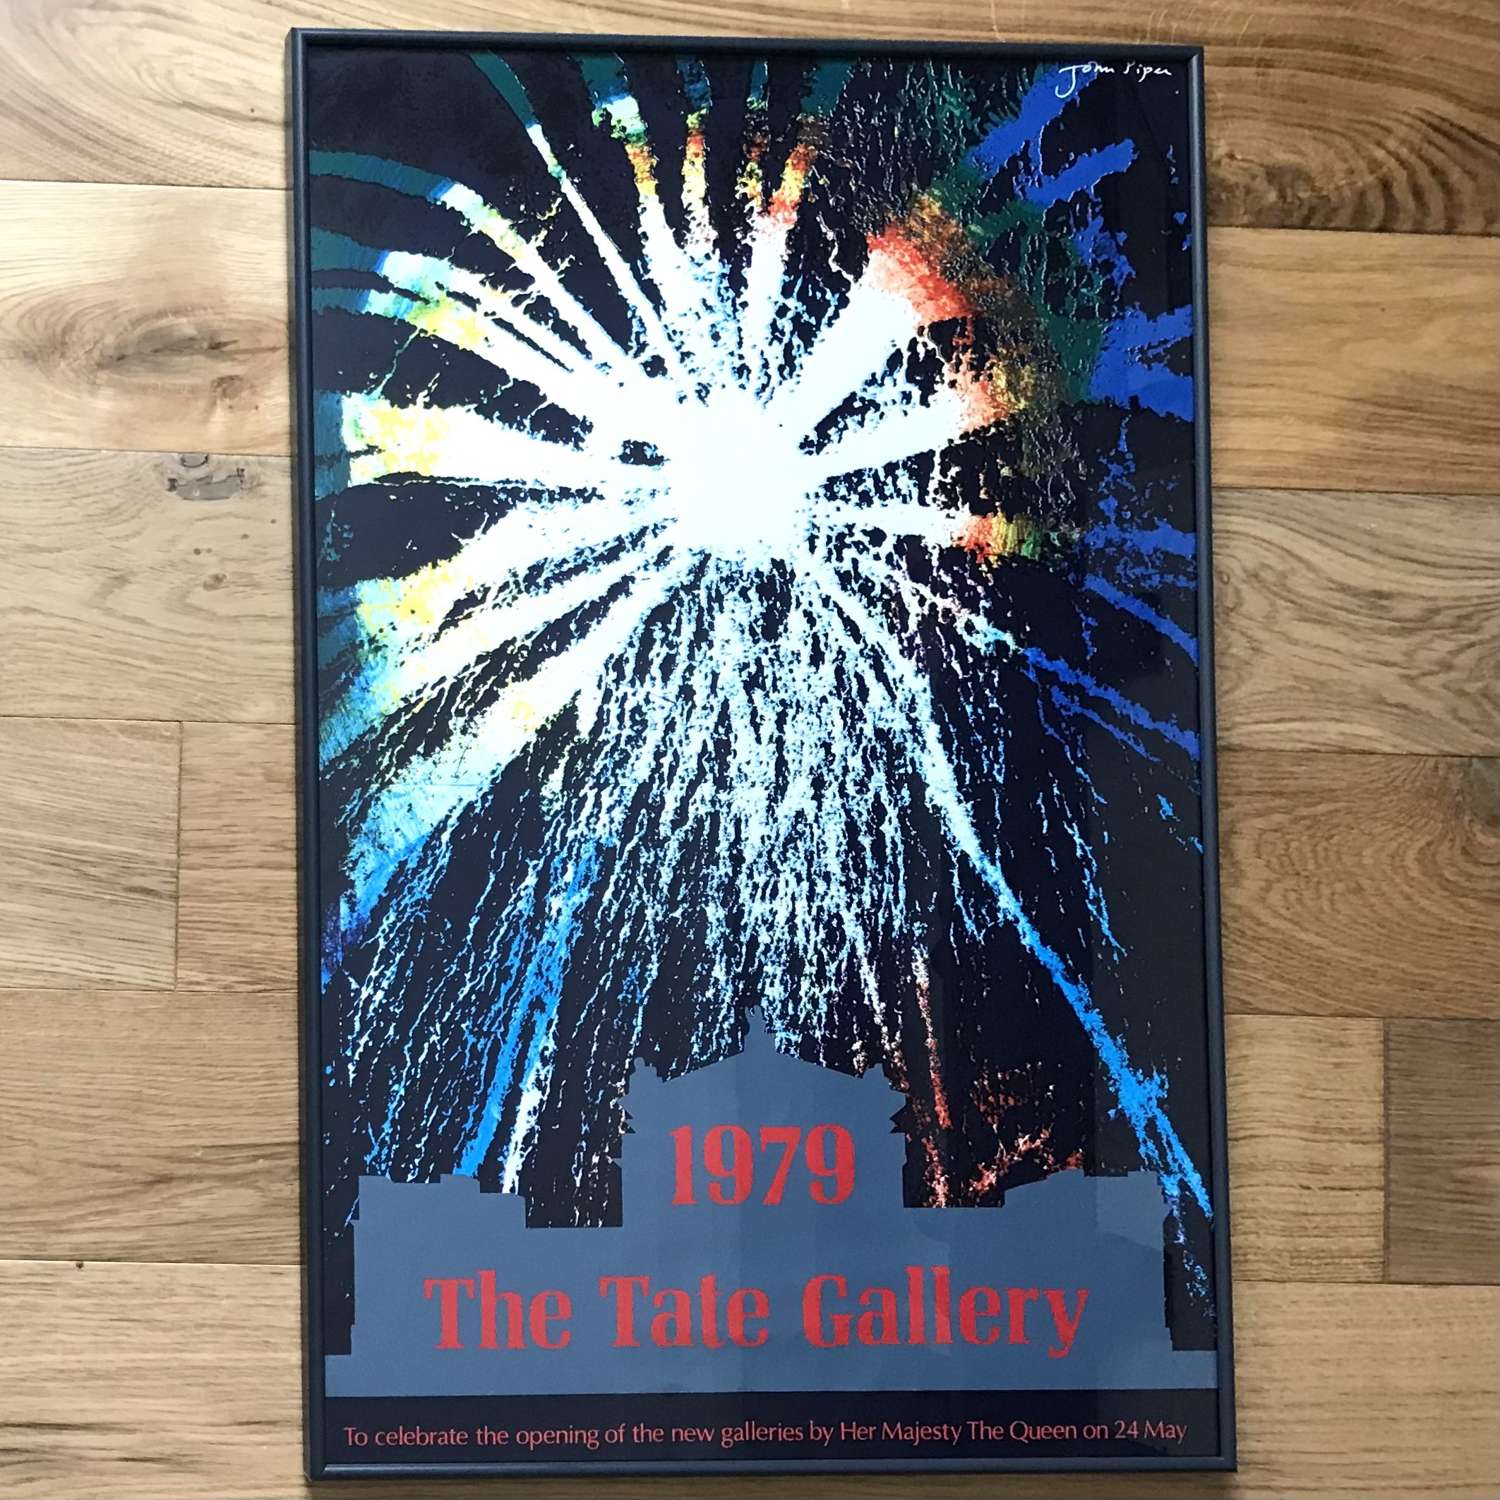 John Piper Exhibition Poster for Tate Gallery, London 1979